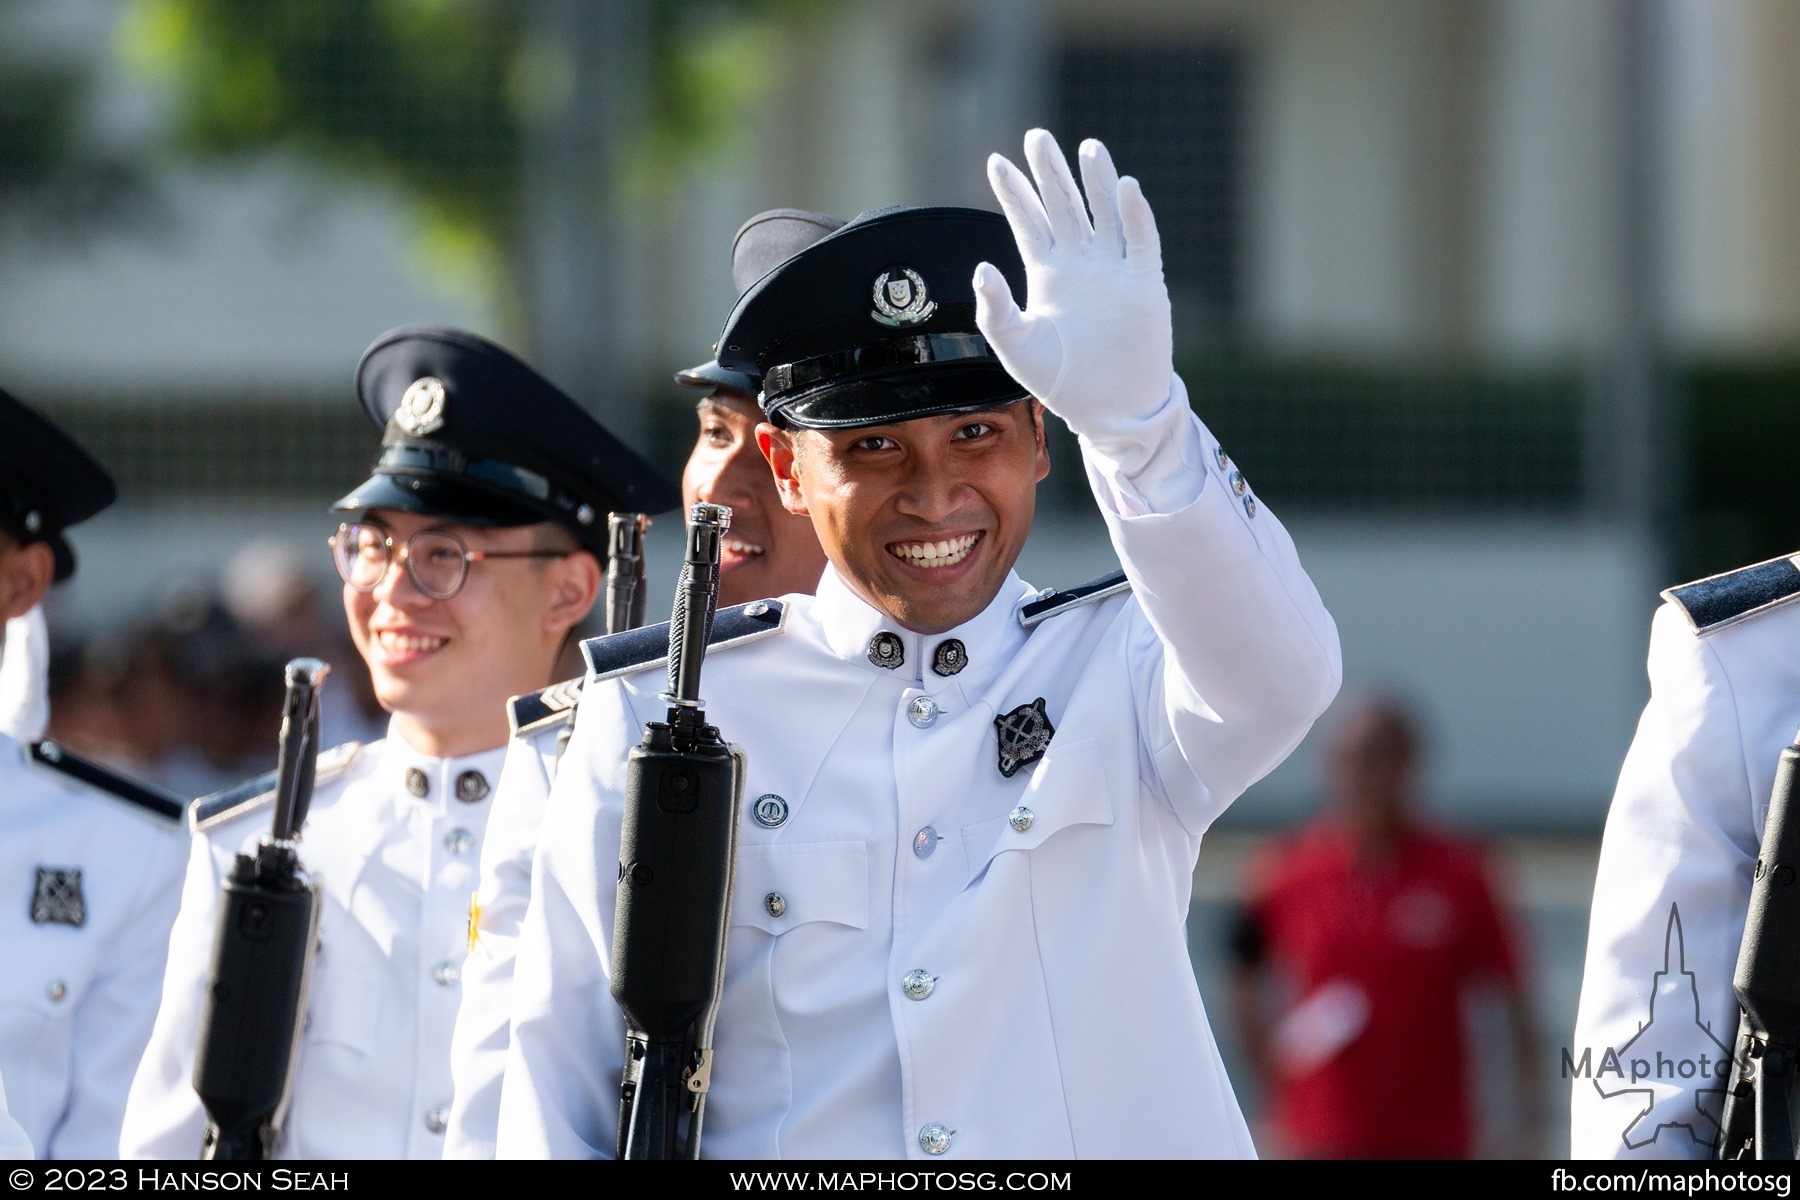 A member of the Singapore Police Force Guard-of-Honour contingent waves to the camera.